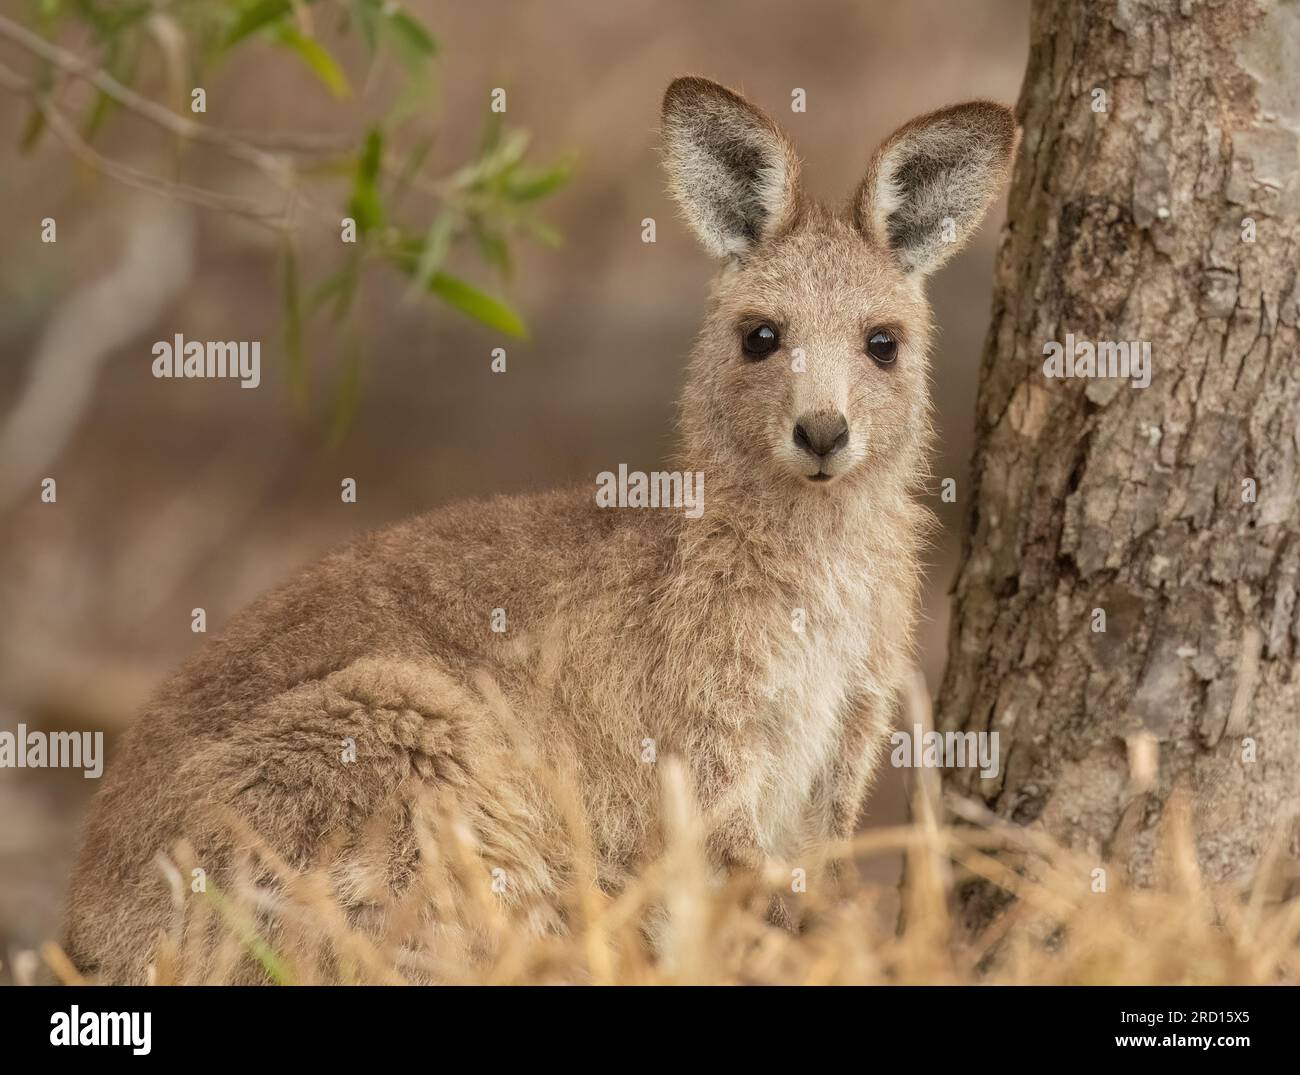 The Eastern Grey Kangaroo is an iconic marsupial mammal and roams freely in Australia. Stock Photo